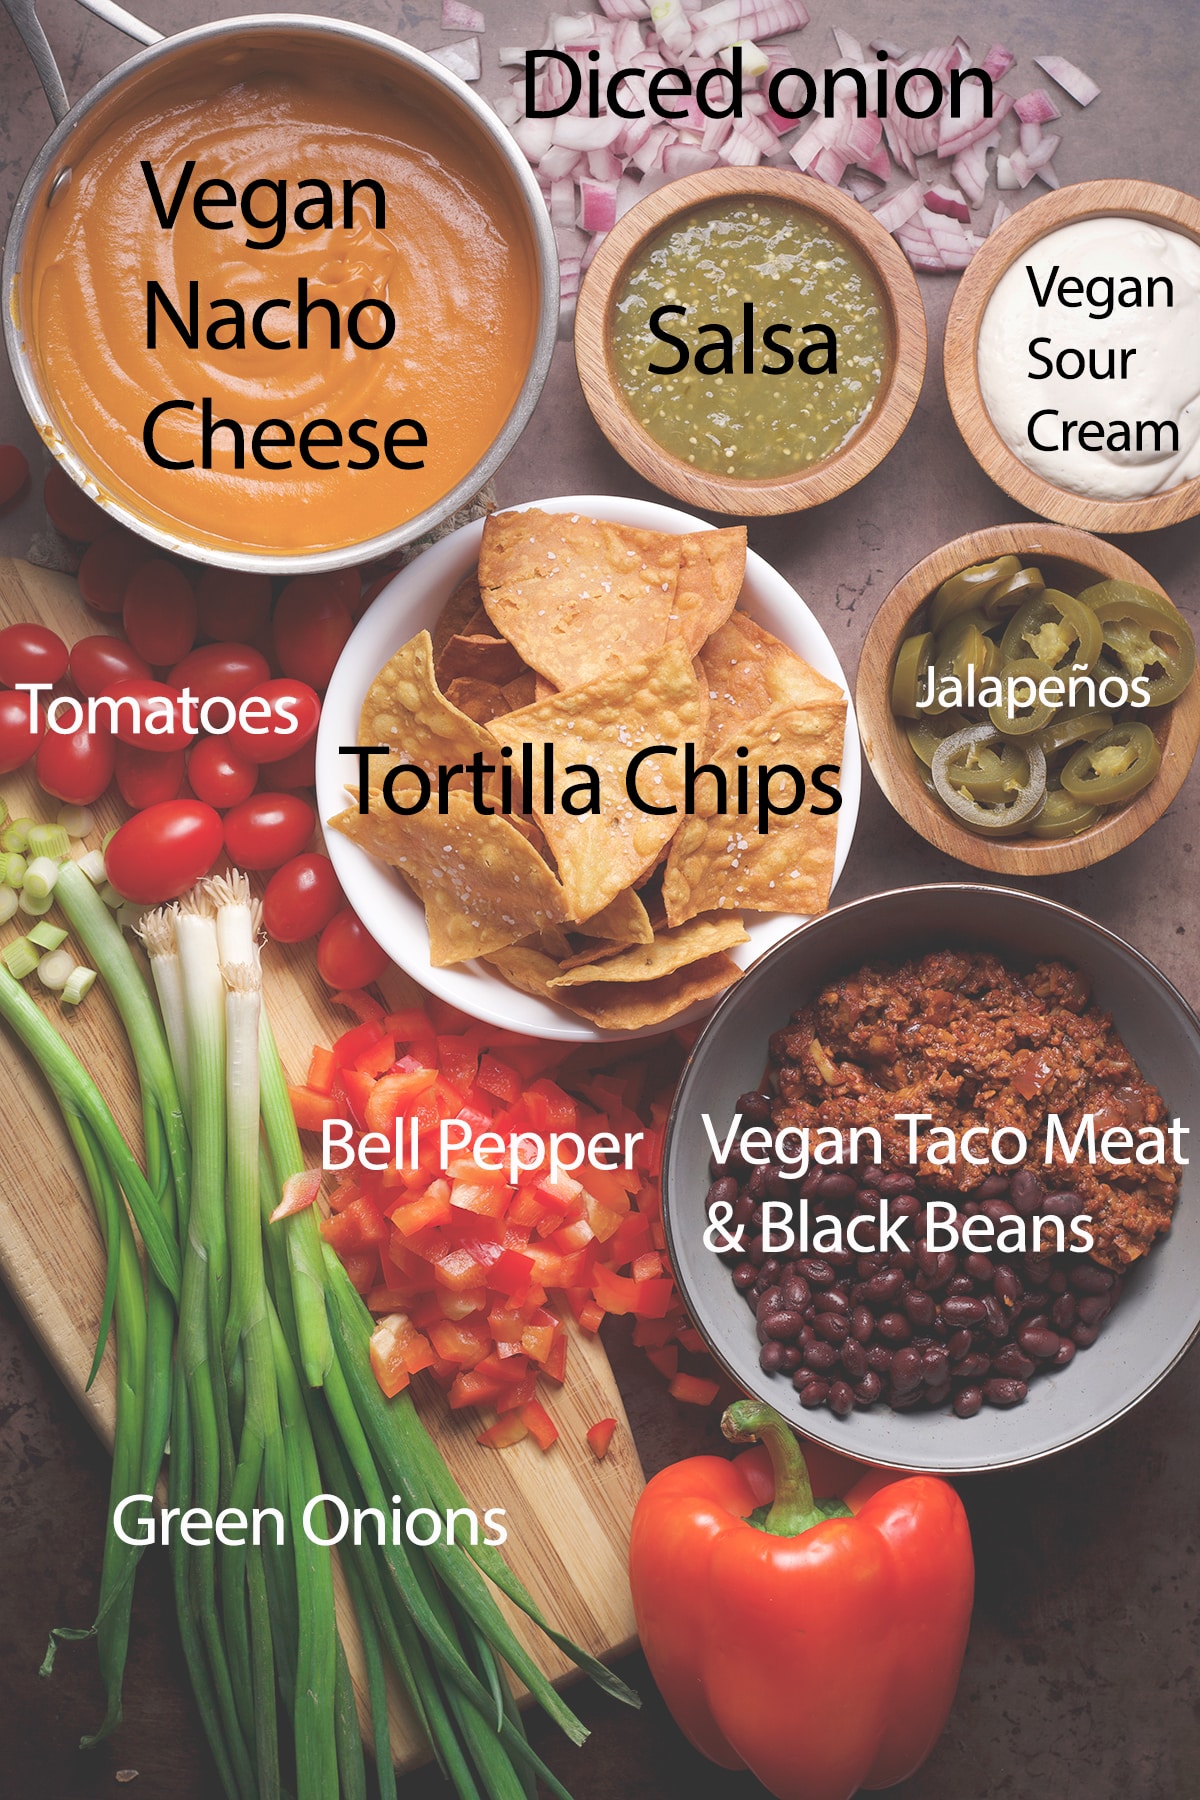 All the ingredients you need to make loaded vegan nachos.